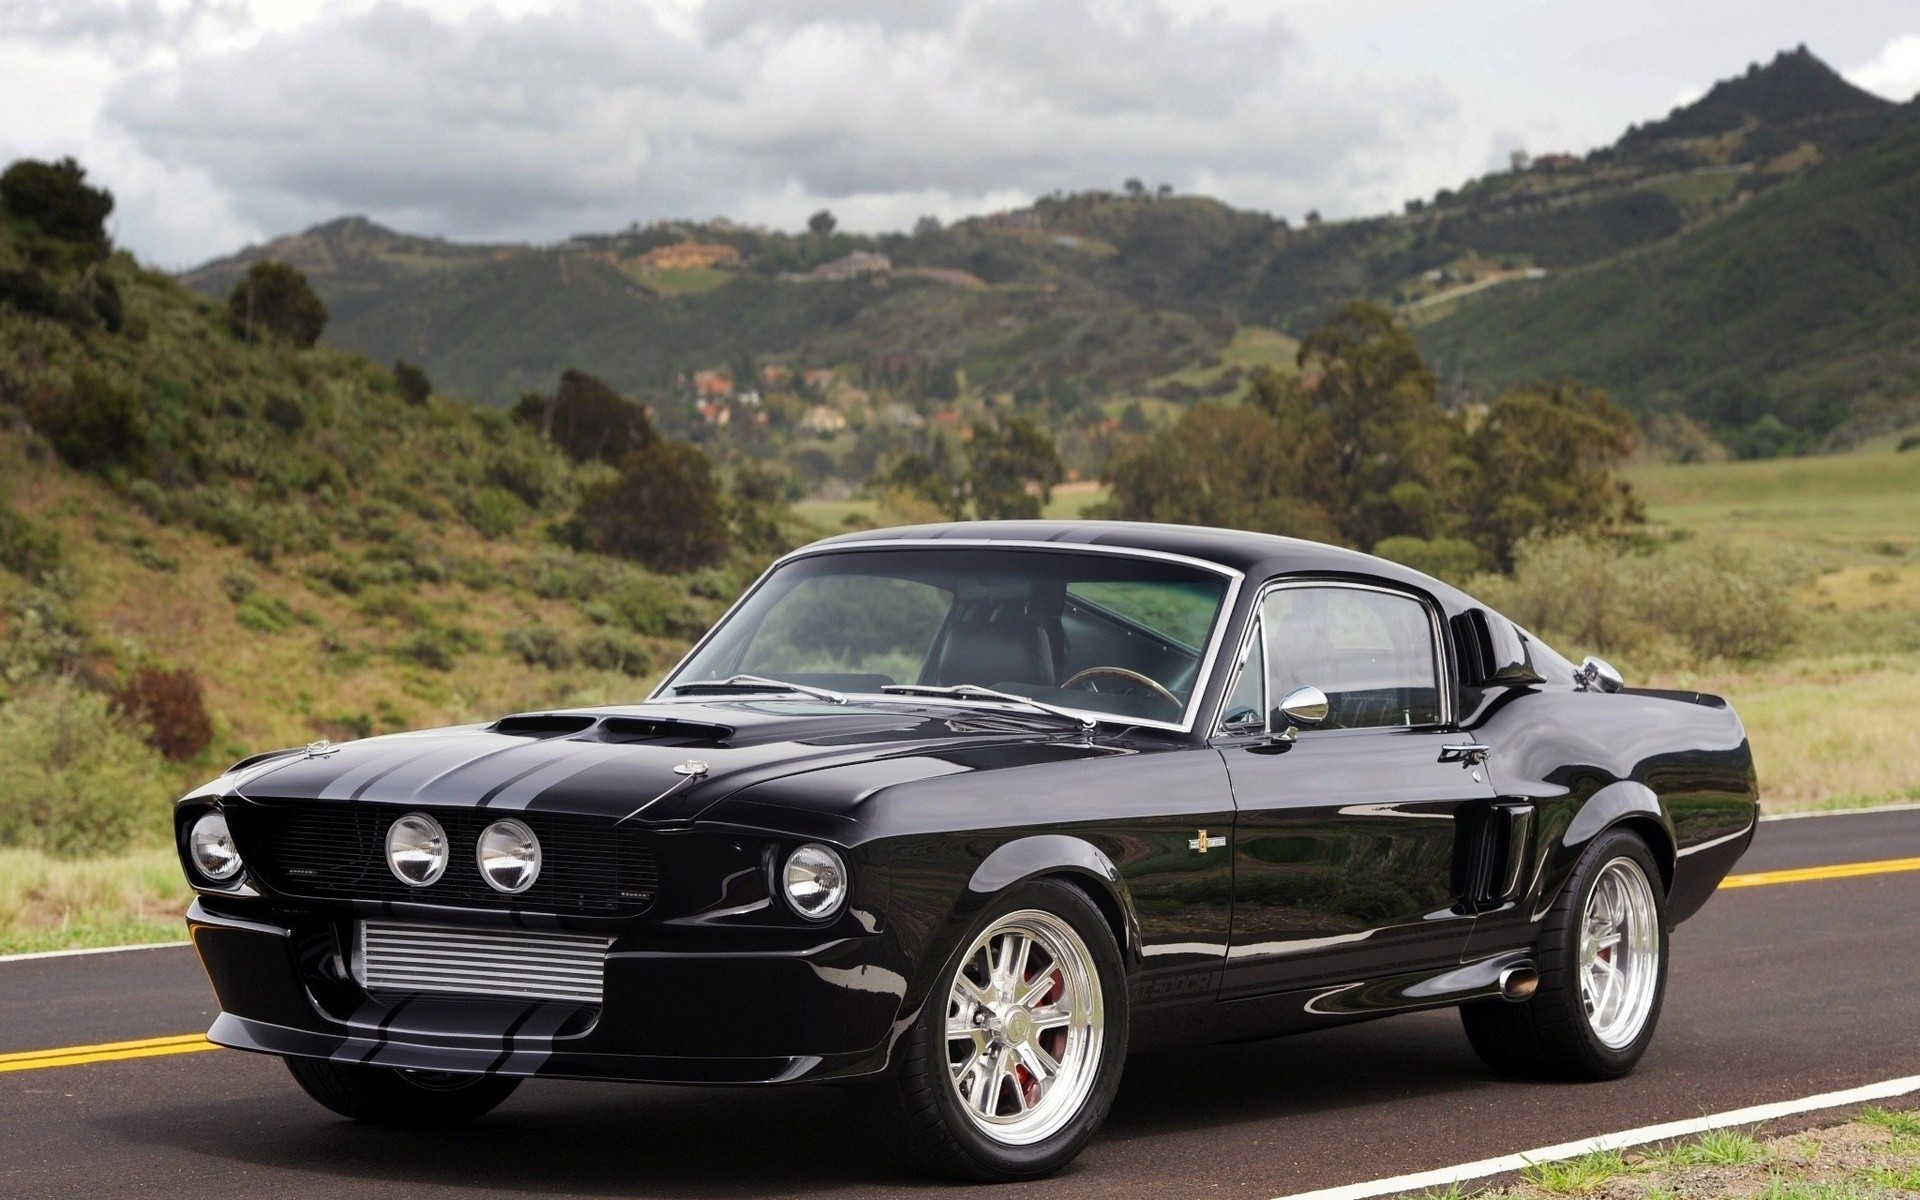 Ford Mustang Shelby GT500 Backgrounds, Compatible - PC, Mobile, Gadgets| 1920x1200 px